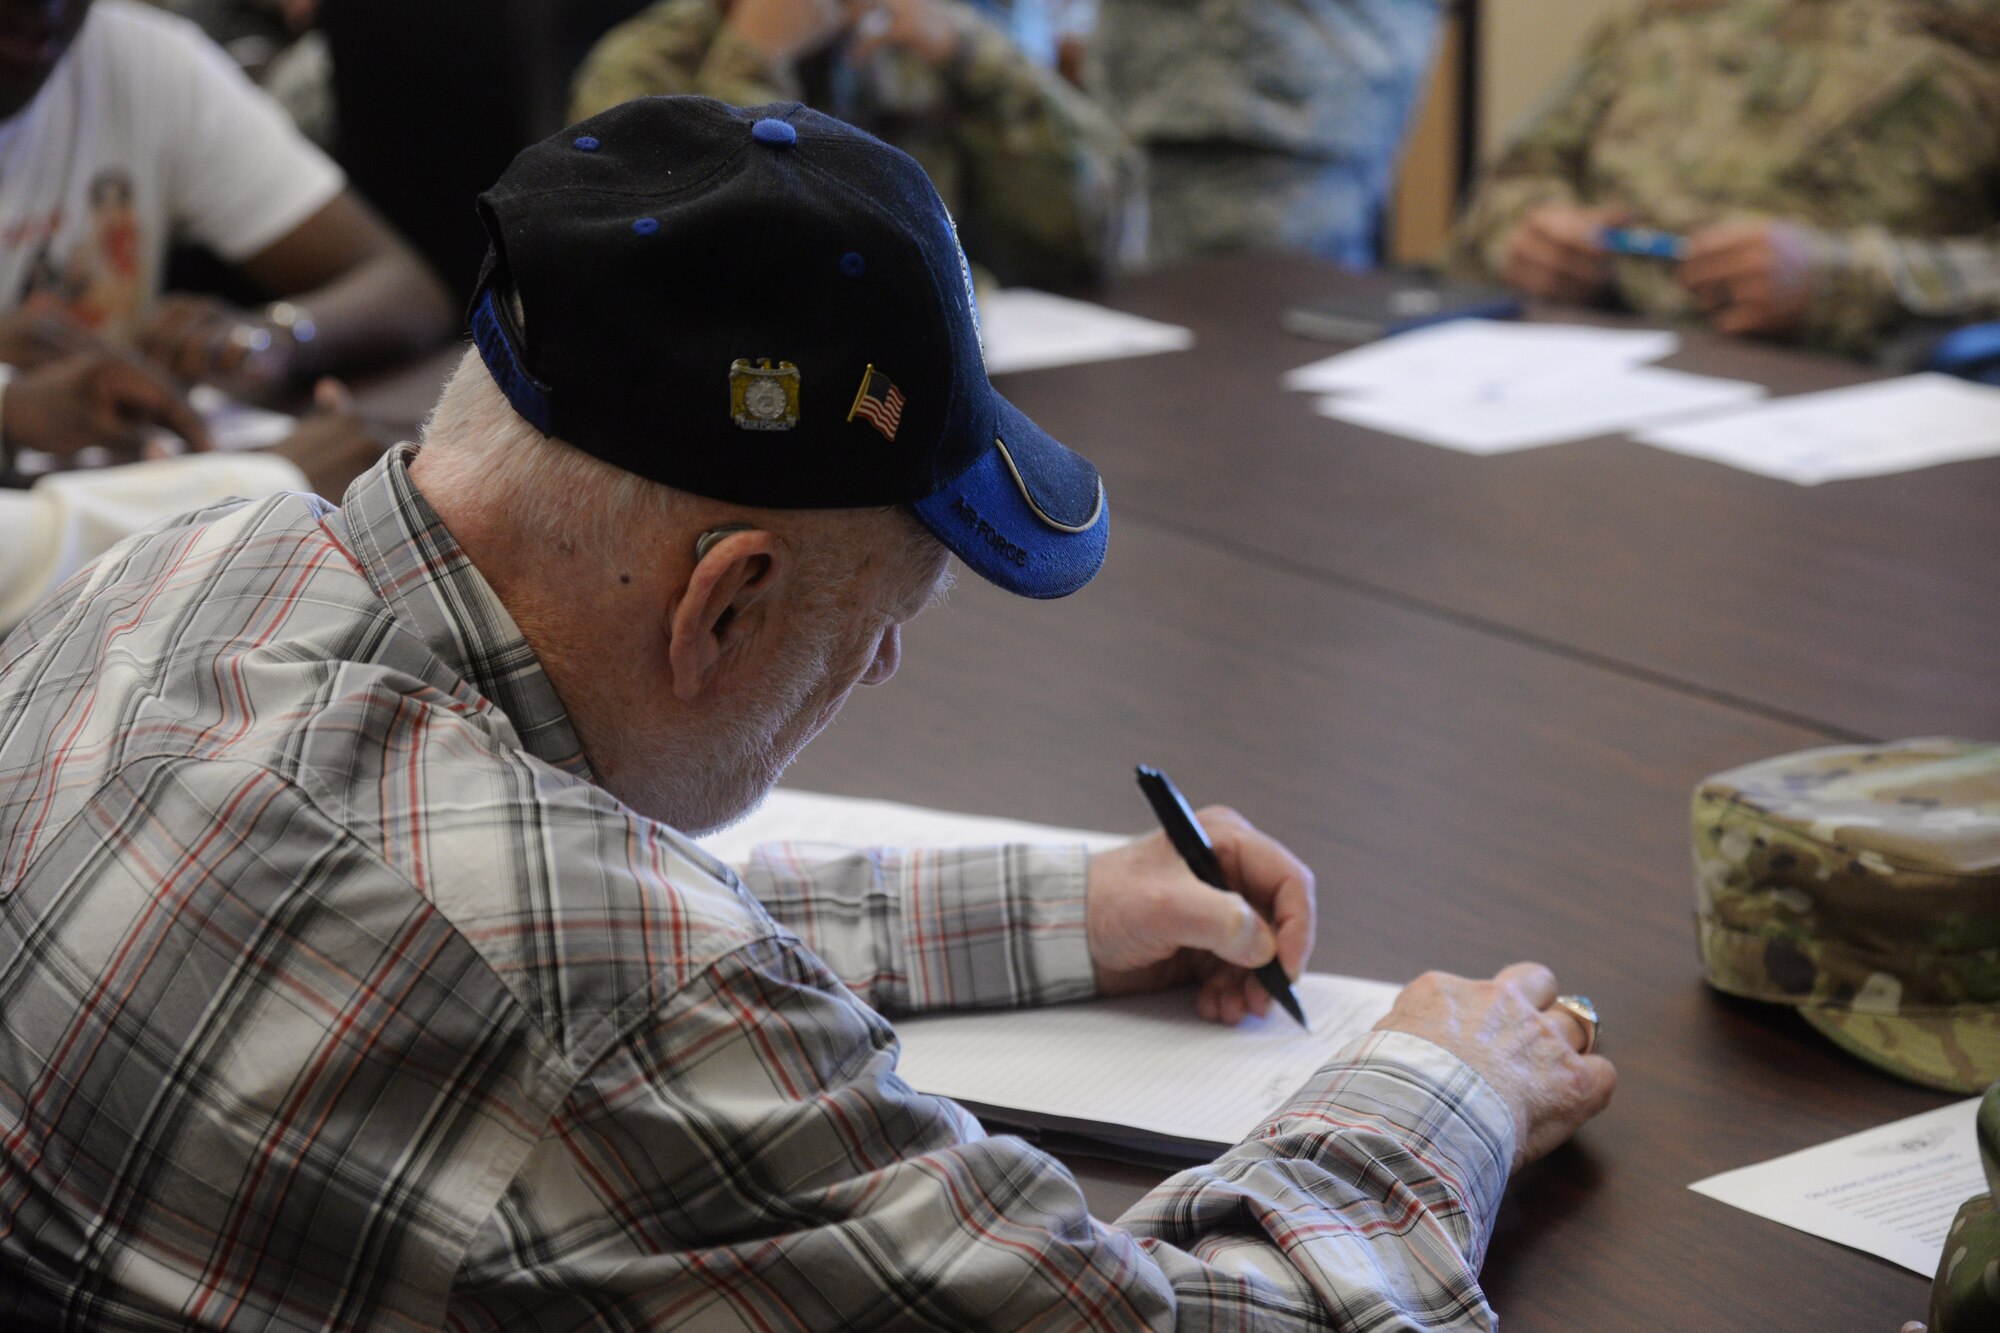 Jim Simmonds, Air Force Sergeants Association recruiter, fills out a document during a meeting July 10, 2019, at Malmstrom Air Force Base, Mont.